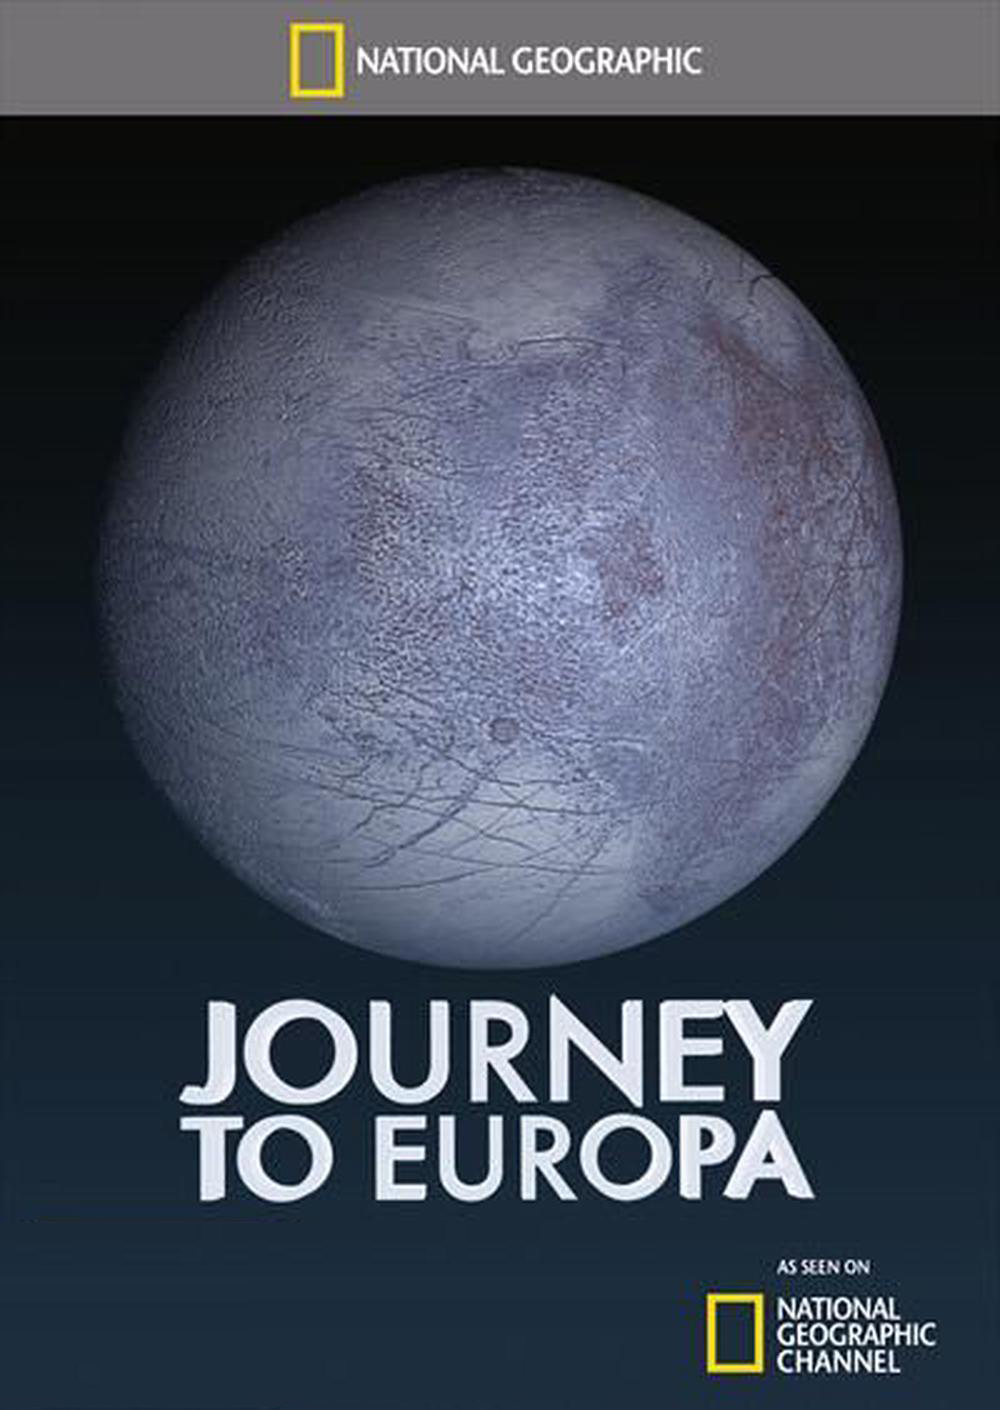 ngc-journey to europa poster